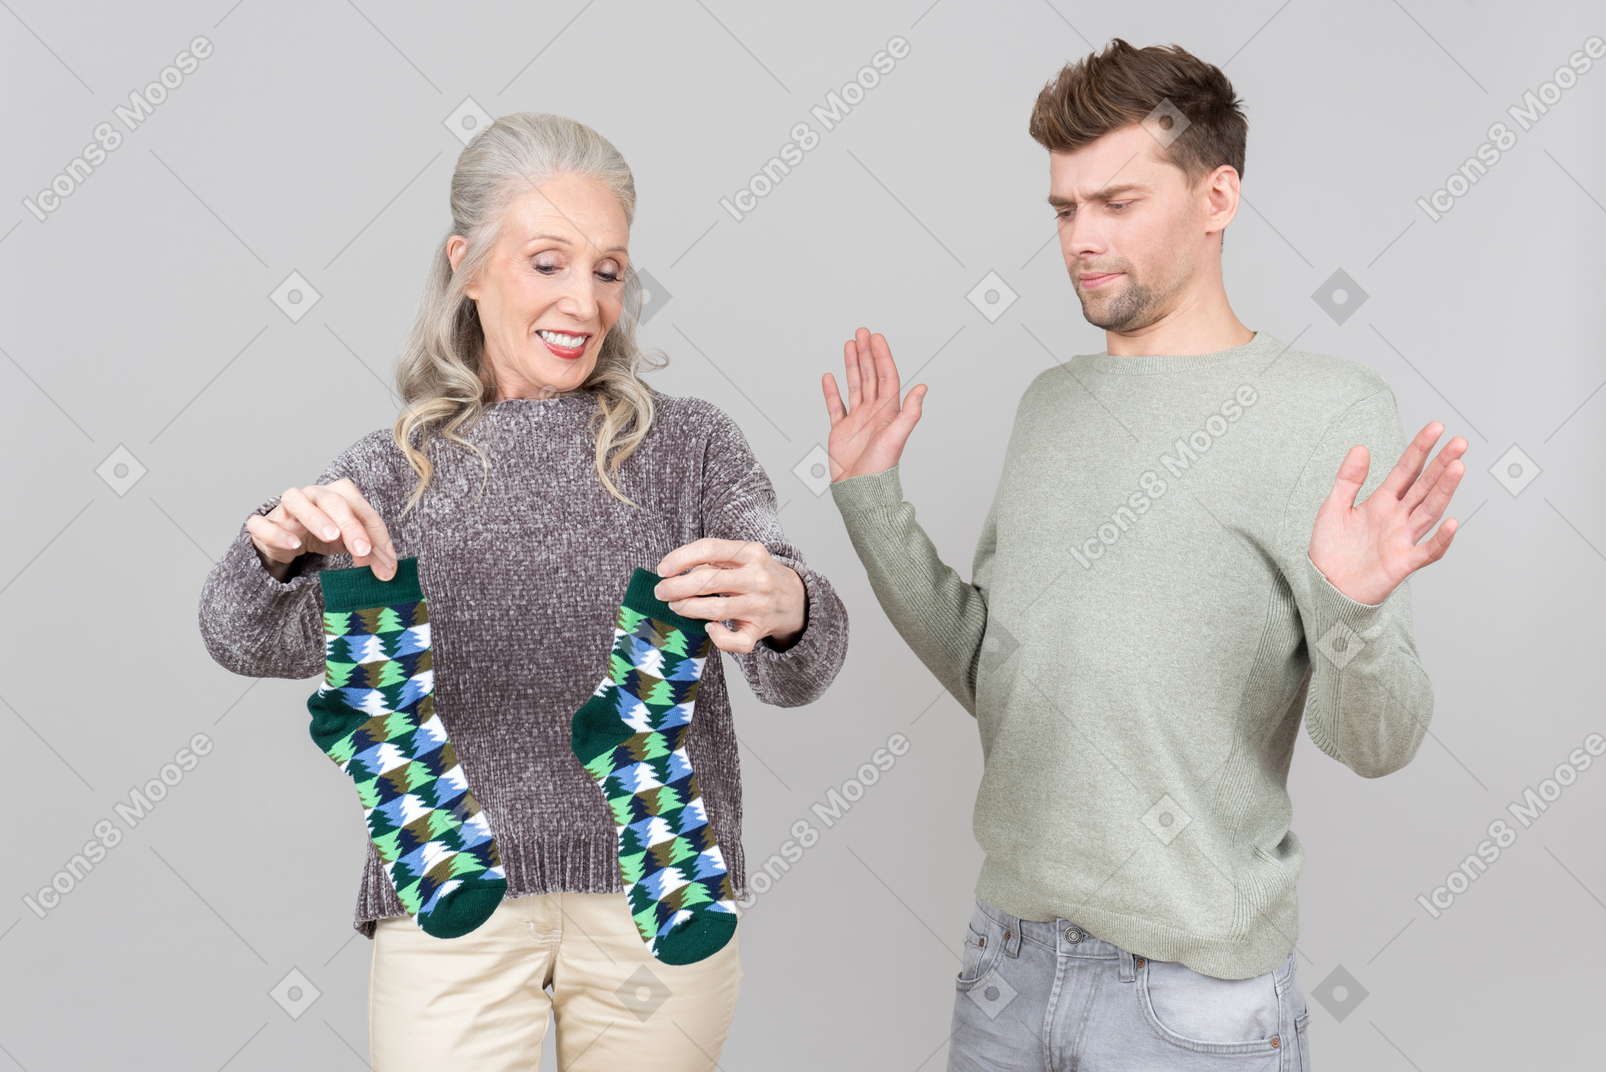 Elegant old woman holding men's socks and a young guy looking bewildered